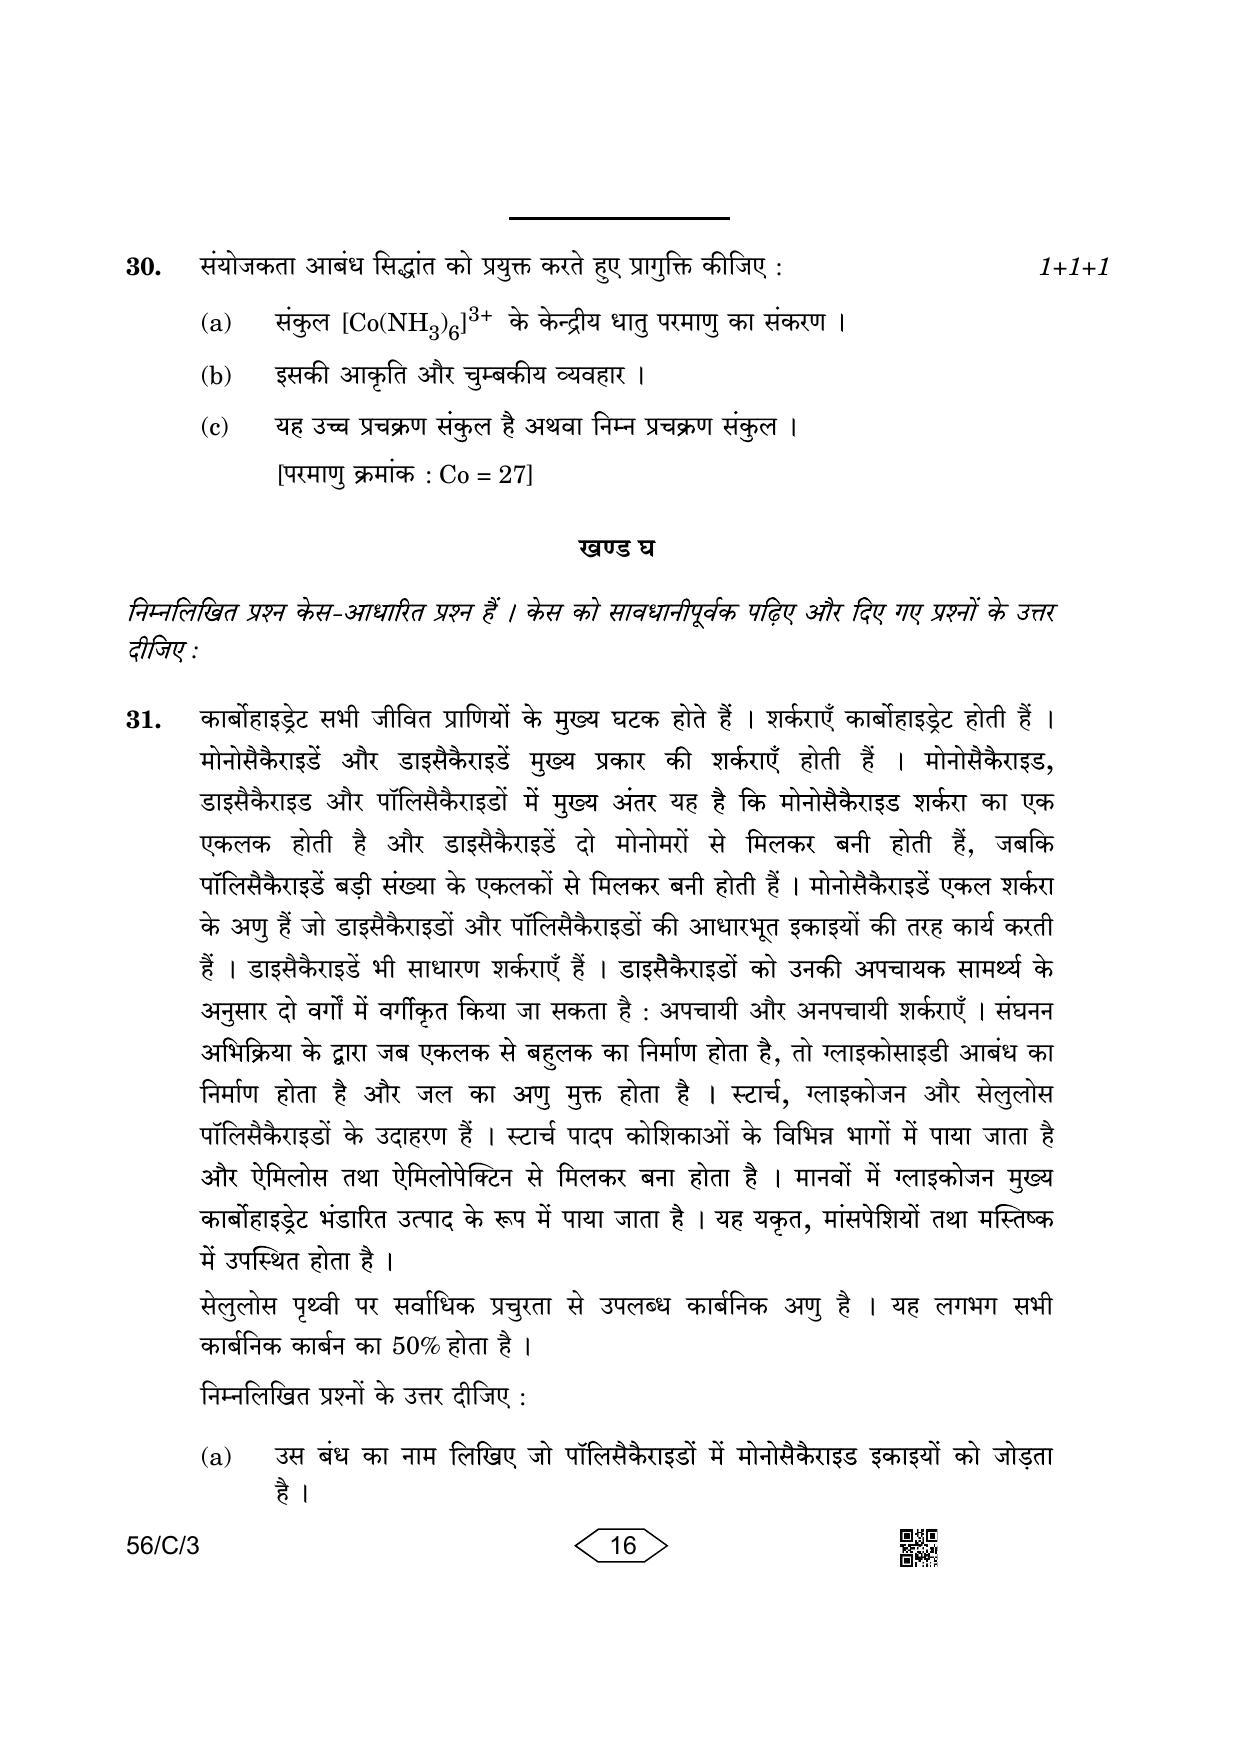 CBSE Class 12 56-3 Chemistry 2023 (Compartment) Question Paper - Page 16